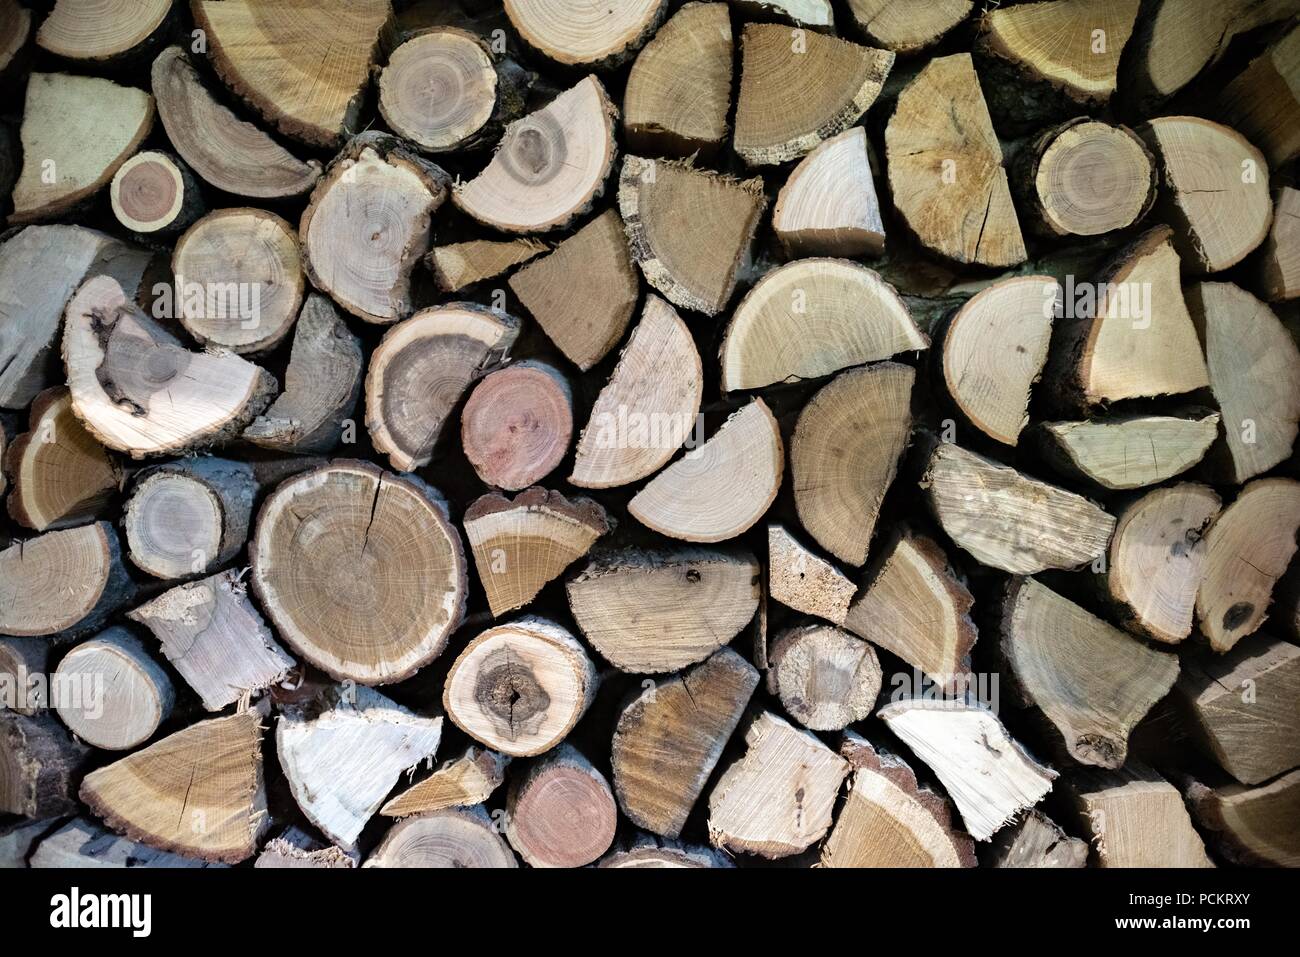 Natural wooden logs cut and stacked in pile, felled by the logging timber industry, Abstract photo of a pile of natural wooden logs background Stock Photo